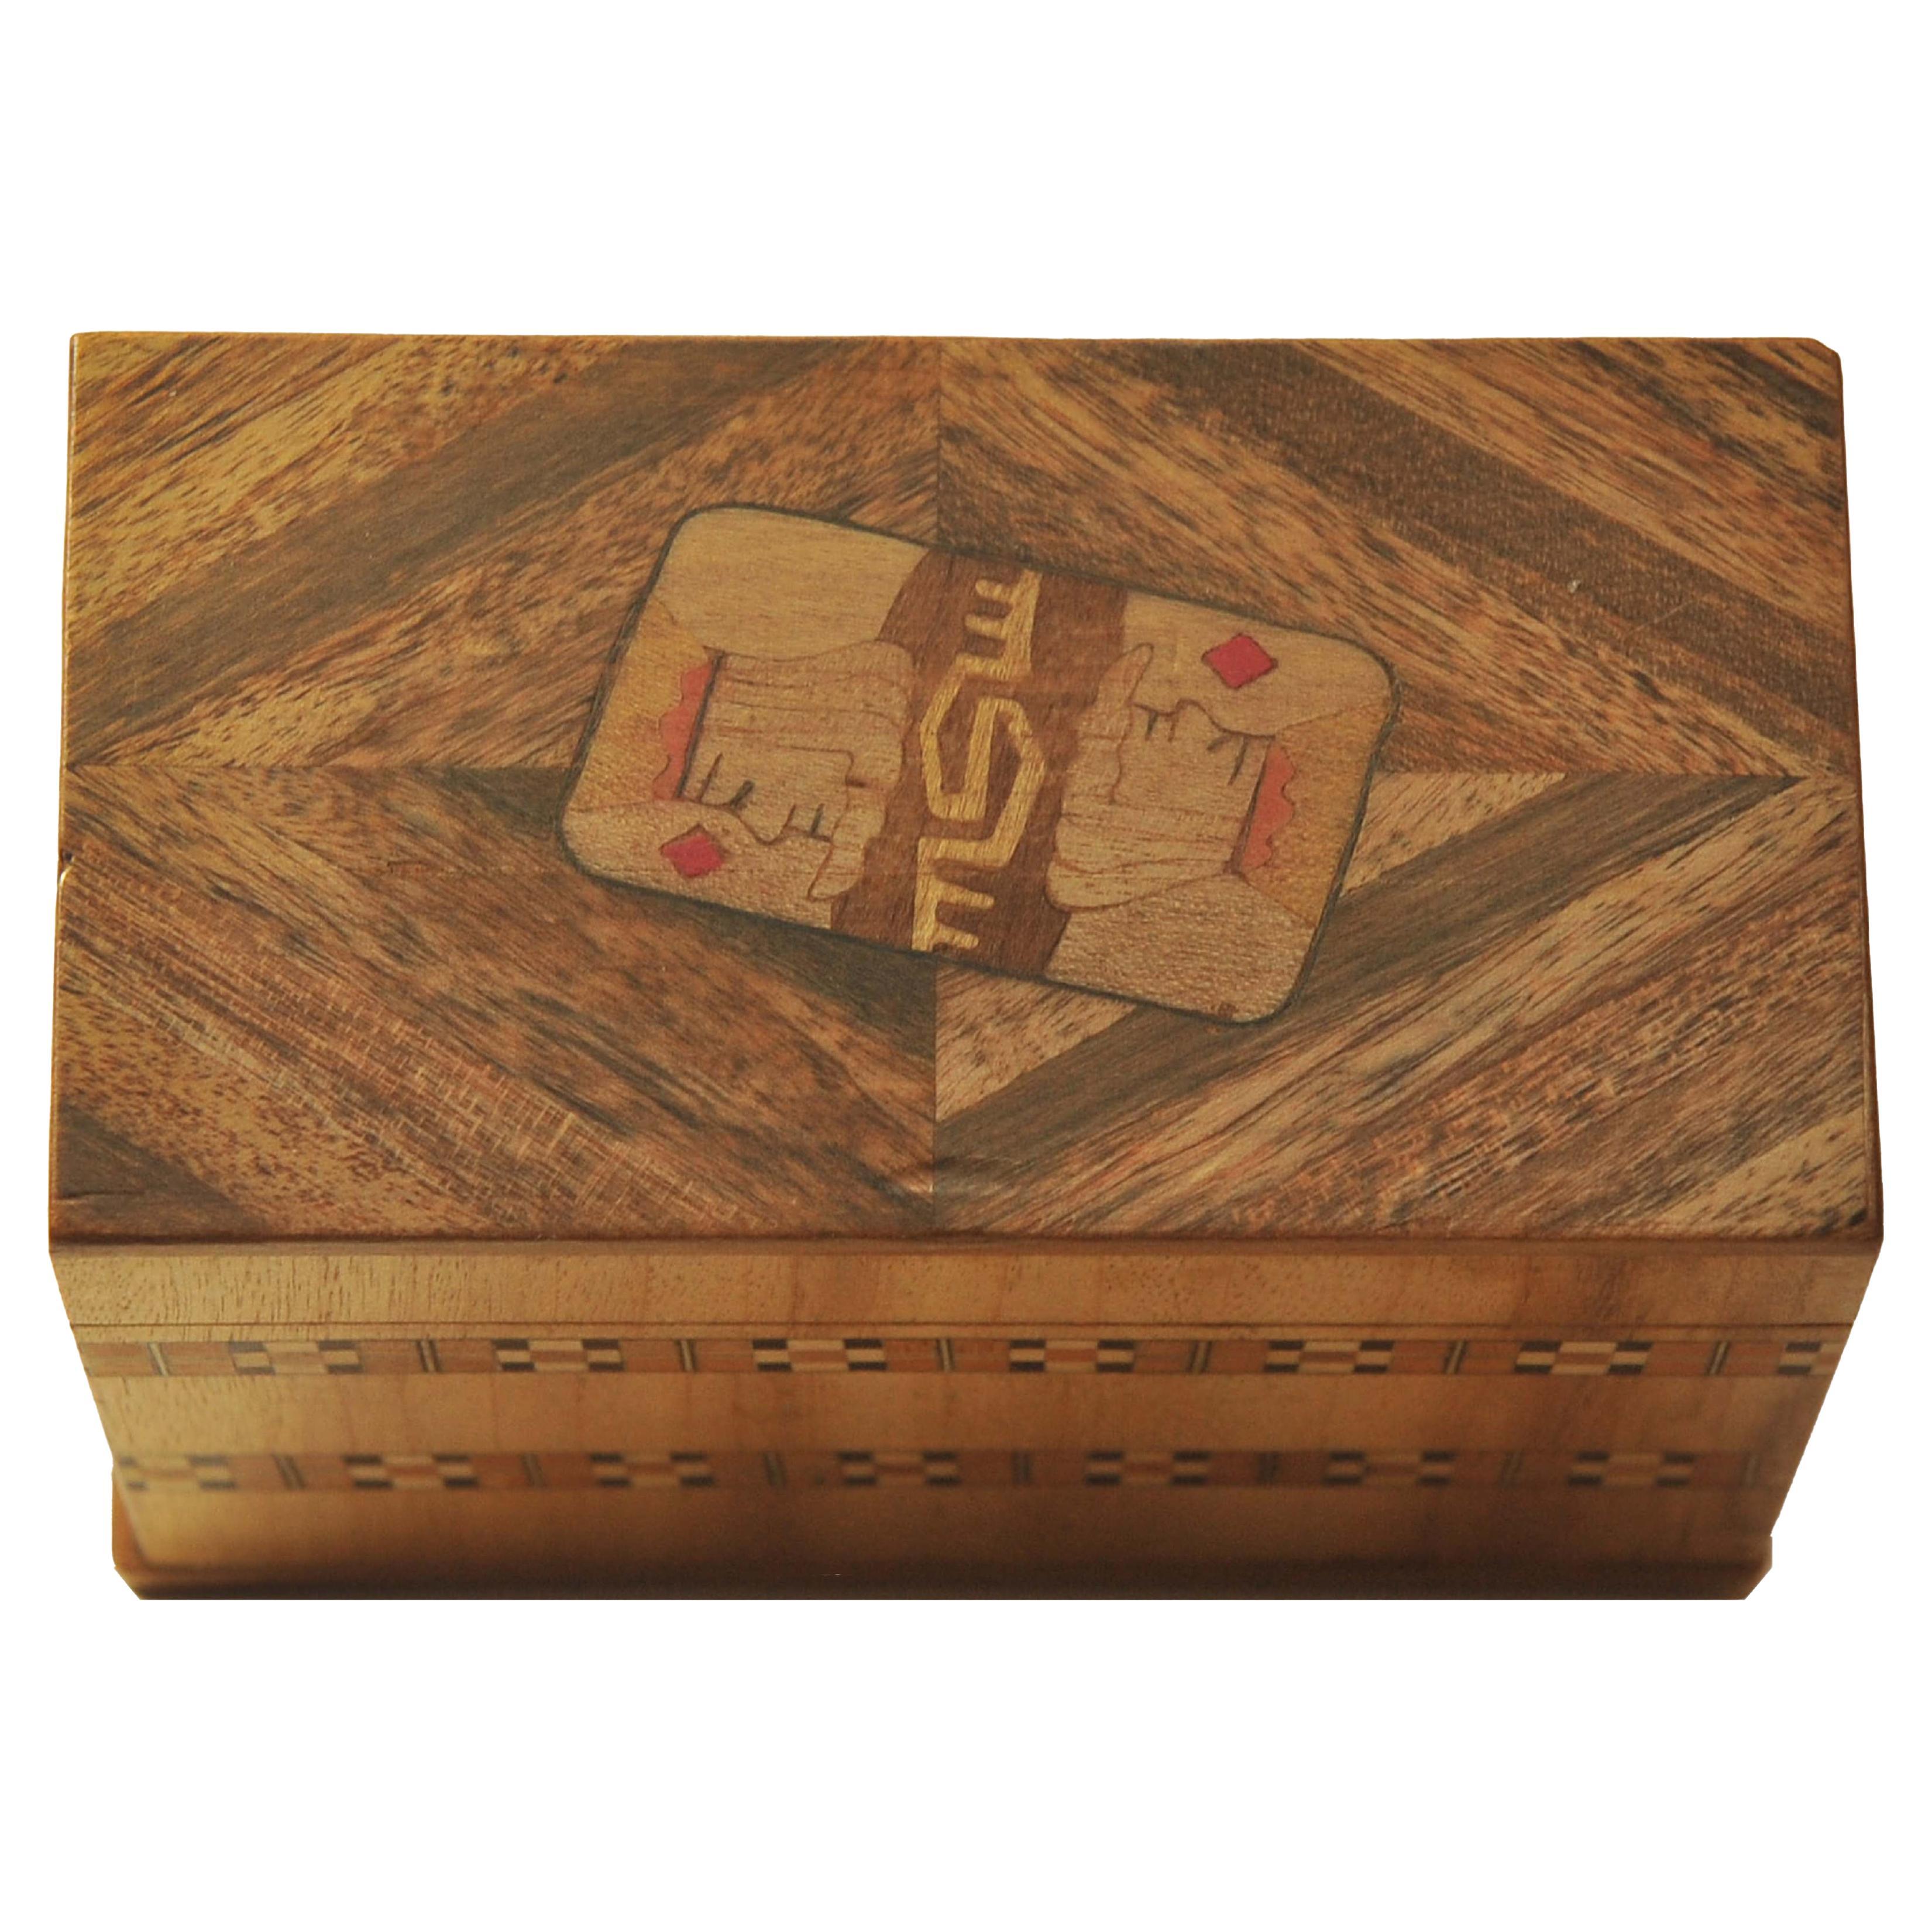 #5A

A Vintage Set of WW1 Aviation & Naval Playing Cards with Wooden Marquetry Tunbridge Ware Card Box Decorated With The King of Diamonds

In Tonbridge (near to Tunbridge Wells), George Wise (1703–1779) is known to have had a business in 1746. It